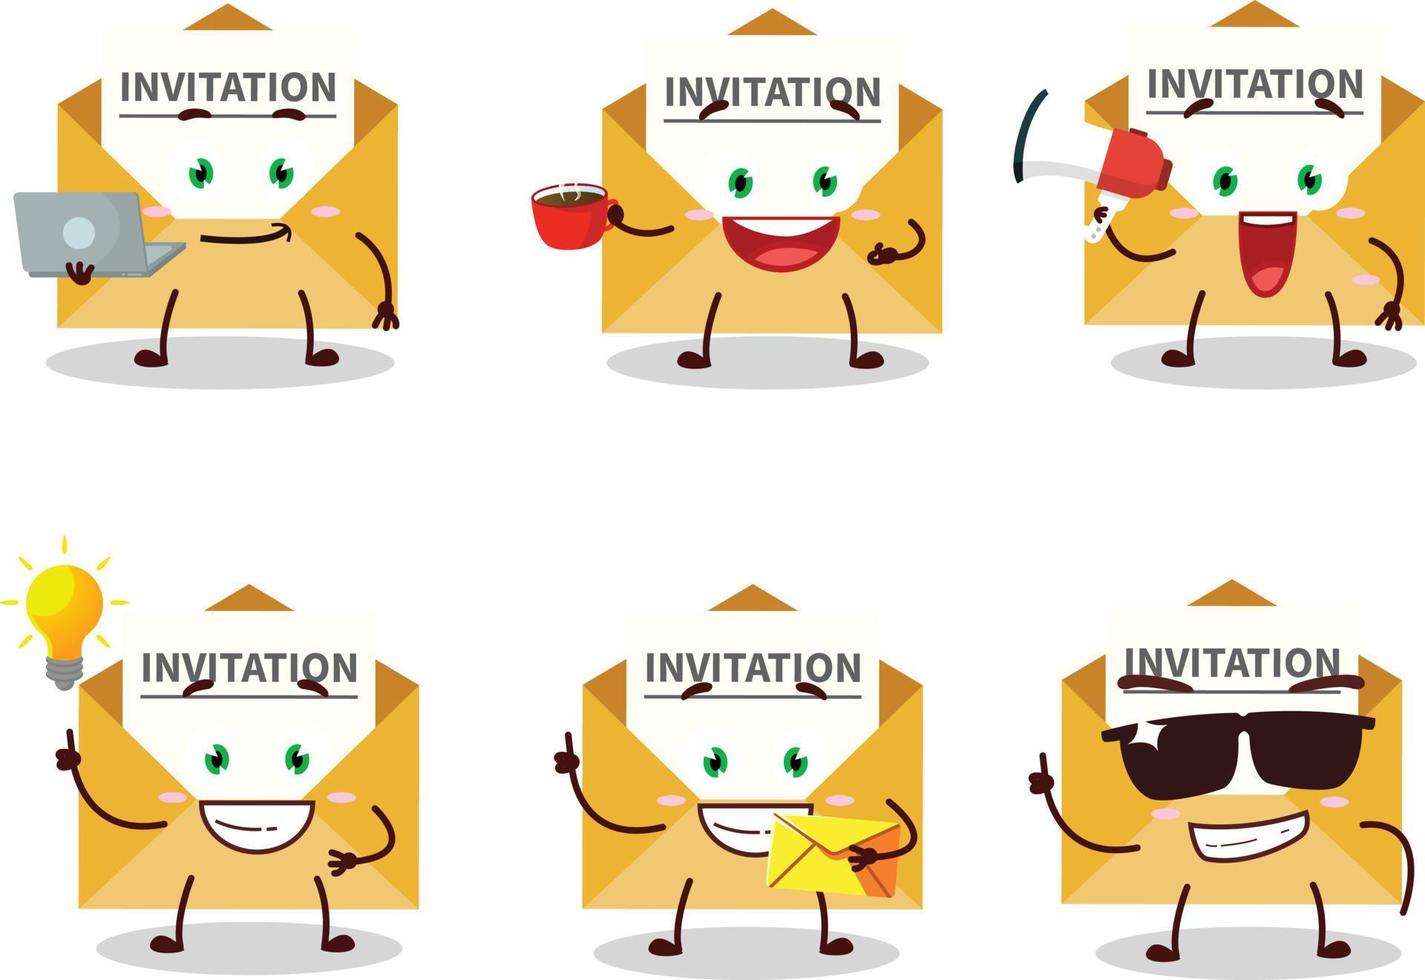 Invitation message cartoon character with various types of business emoticons vector